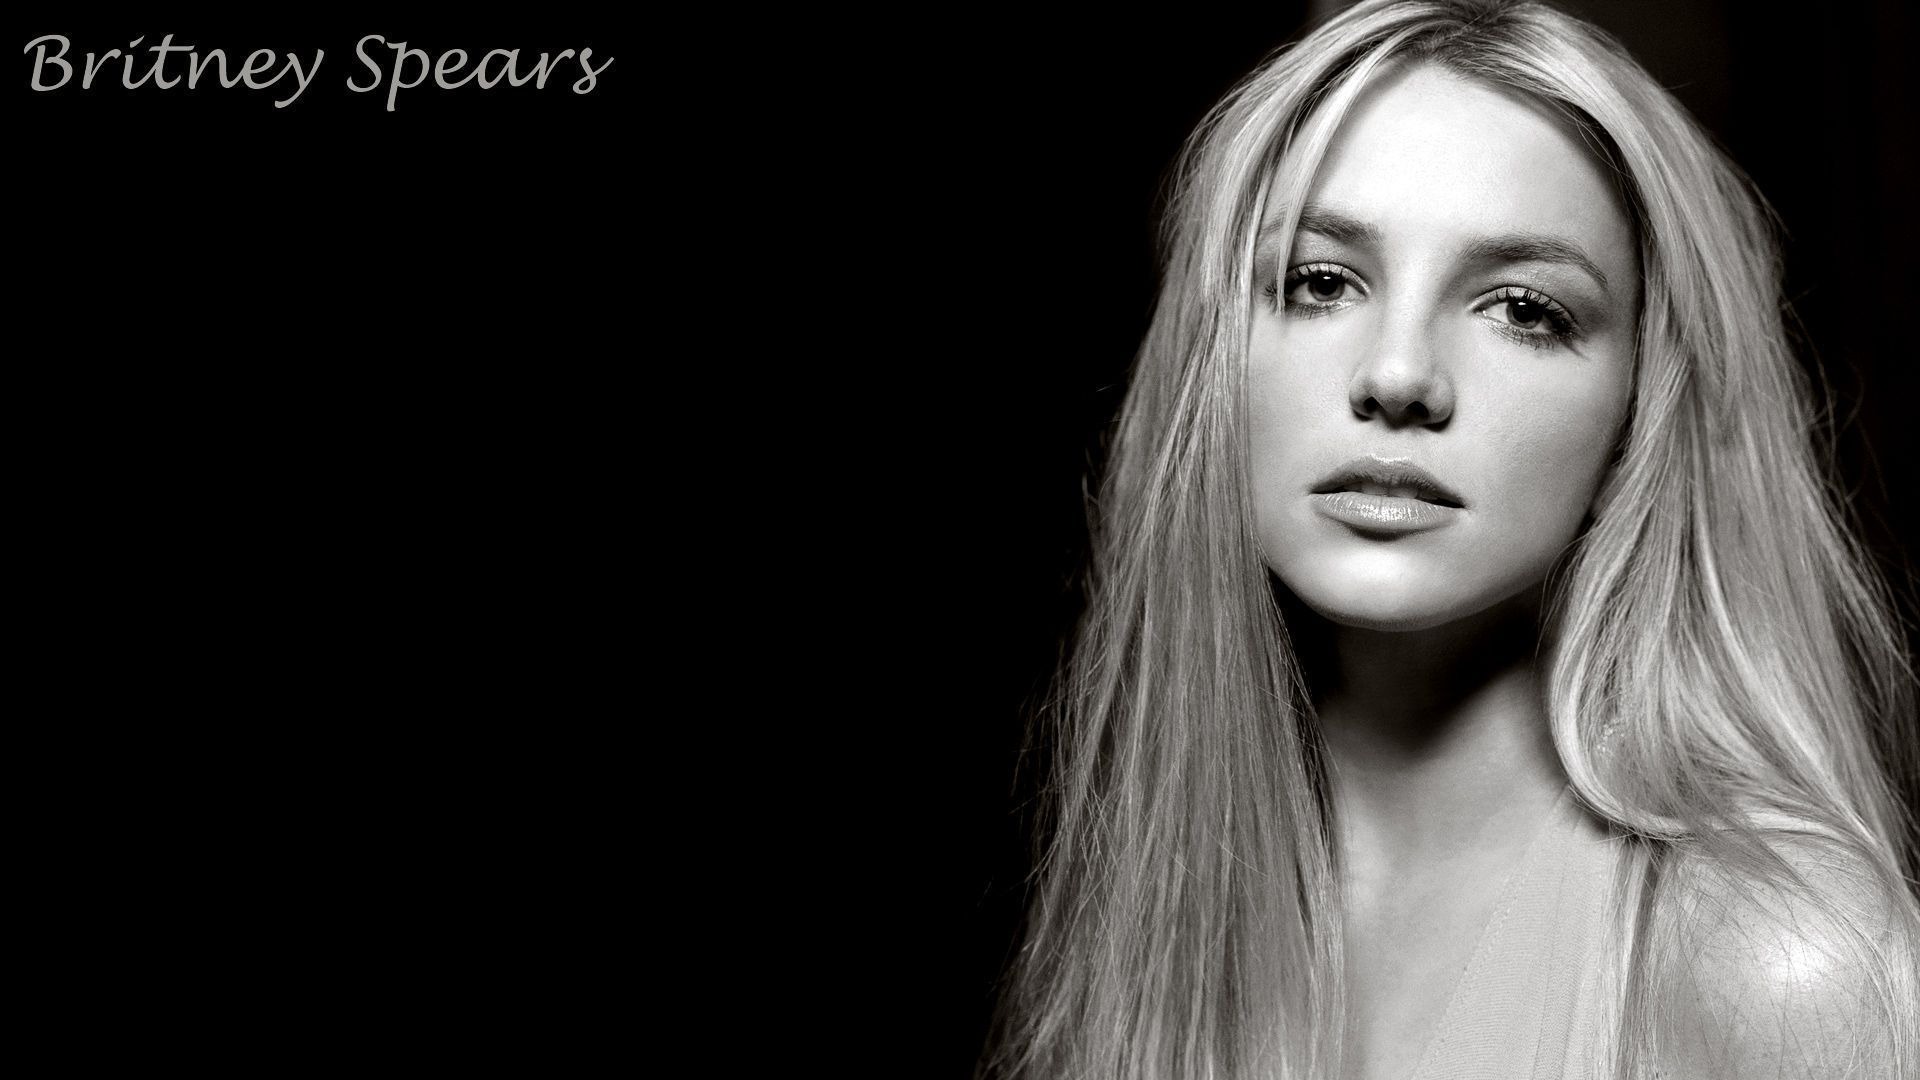 Britney Spears #005 - 1920x1080 Wallpapers Pictures Photos Images